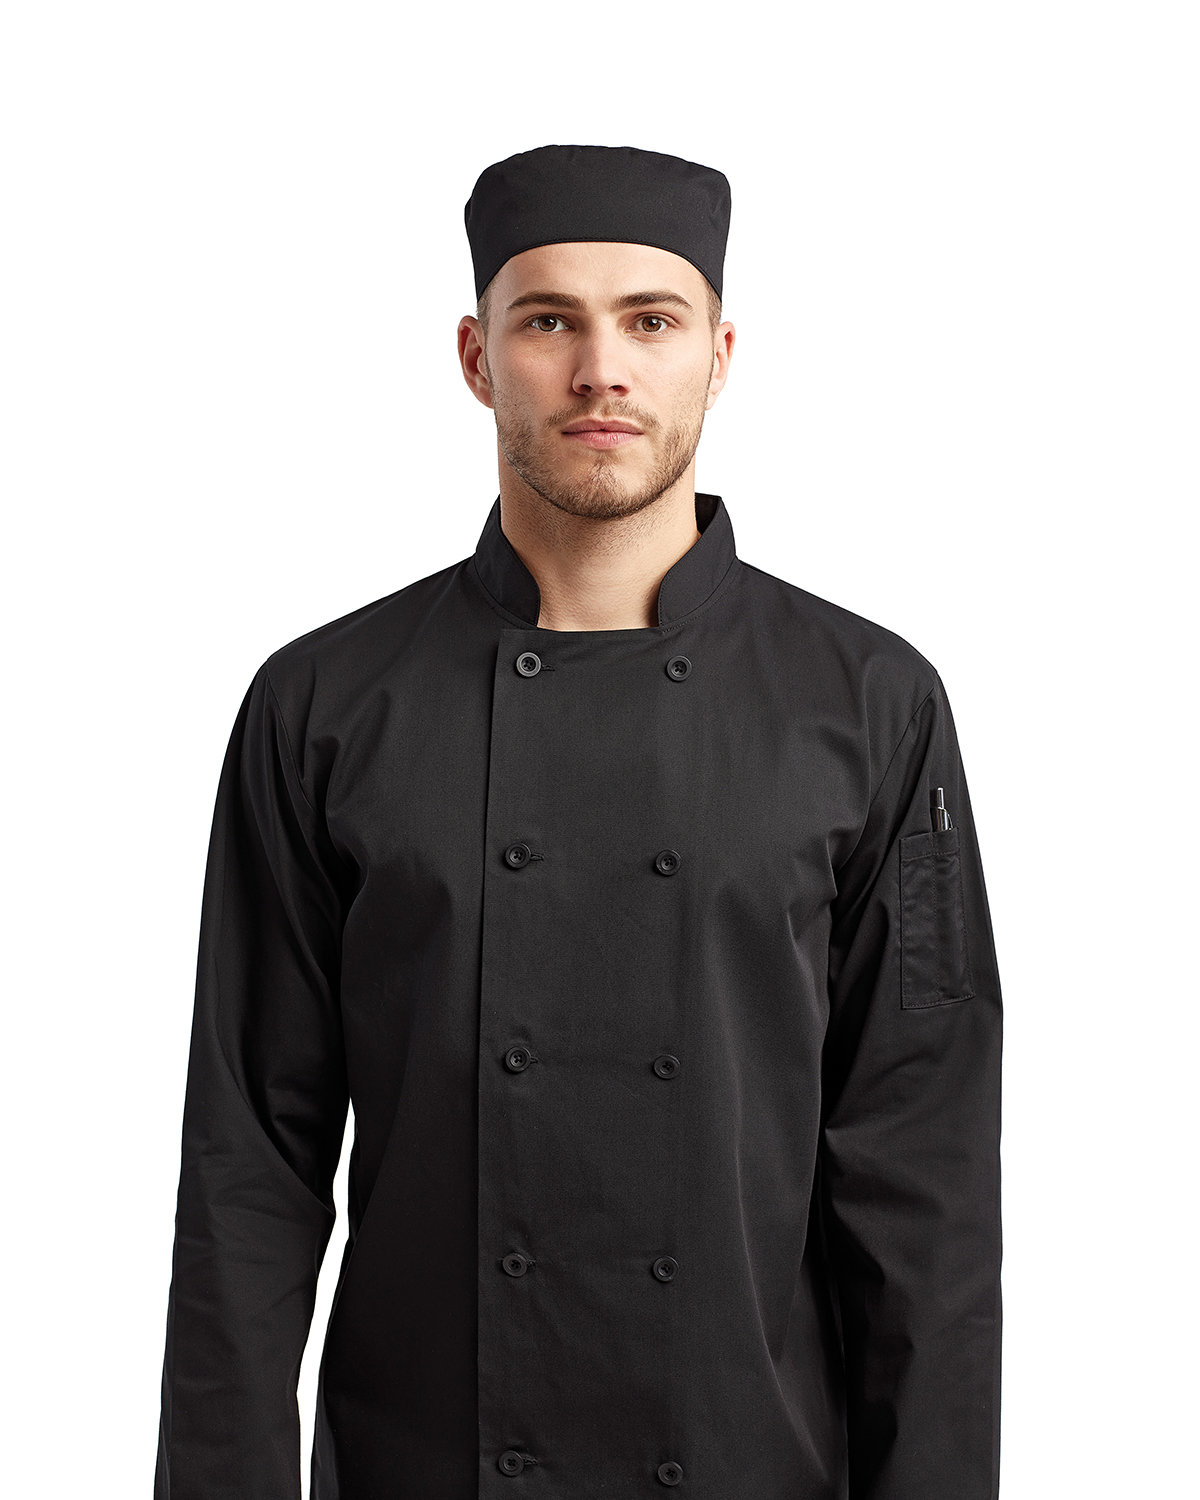 Artisan Collection by Reprime Unisex Chef's Beanie BLACK 